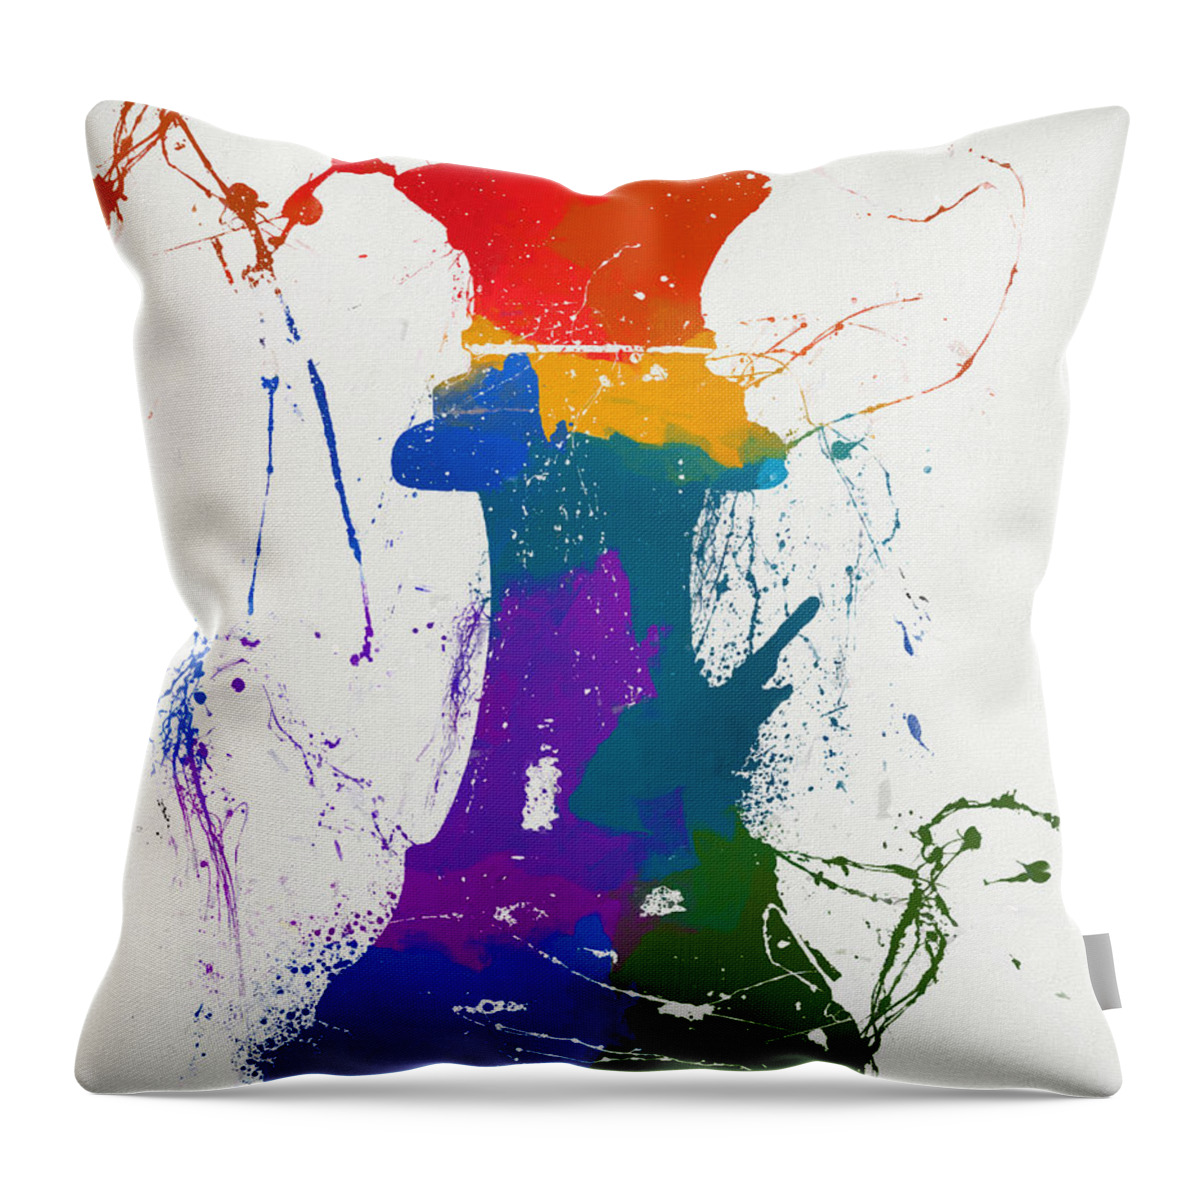 Queen Colorful Chess Piece Painting Throw Pillow featuring the painting Queen Color Splash Chess Painting by Dan Sproul